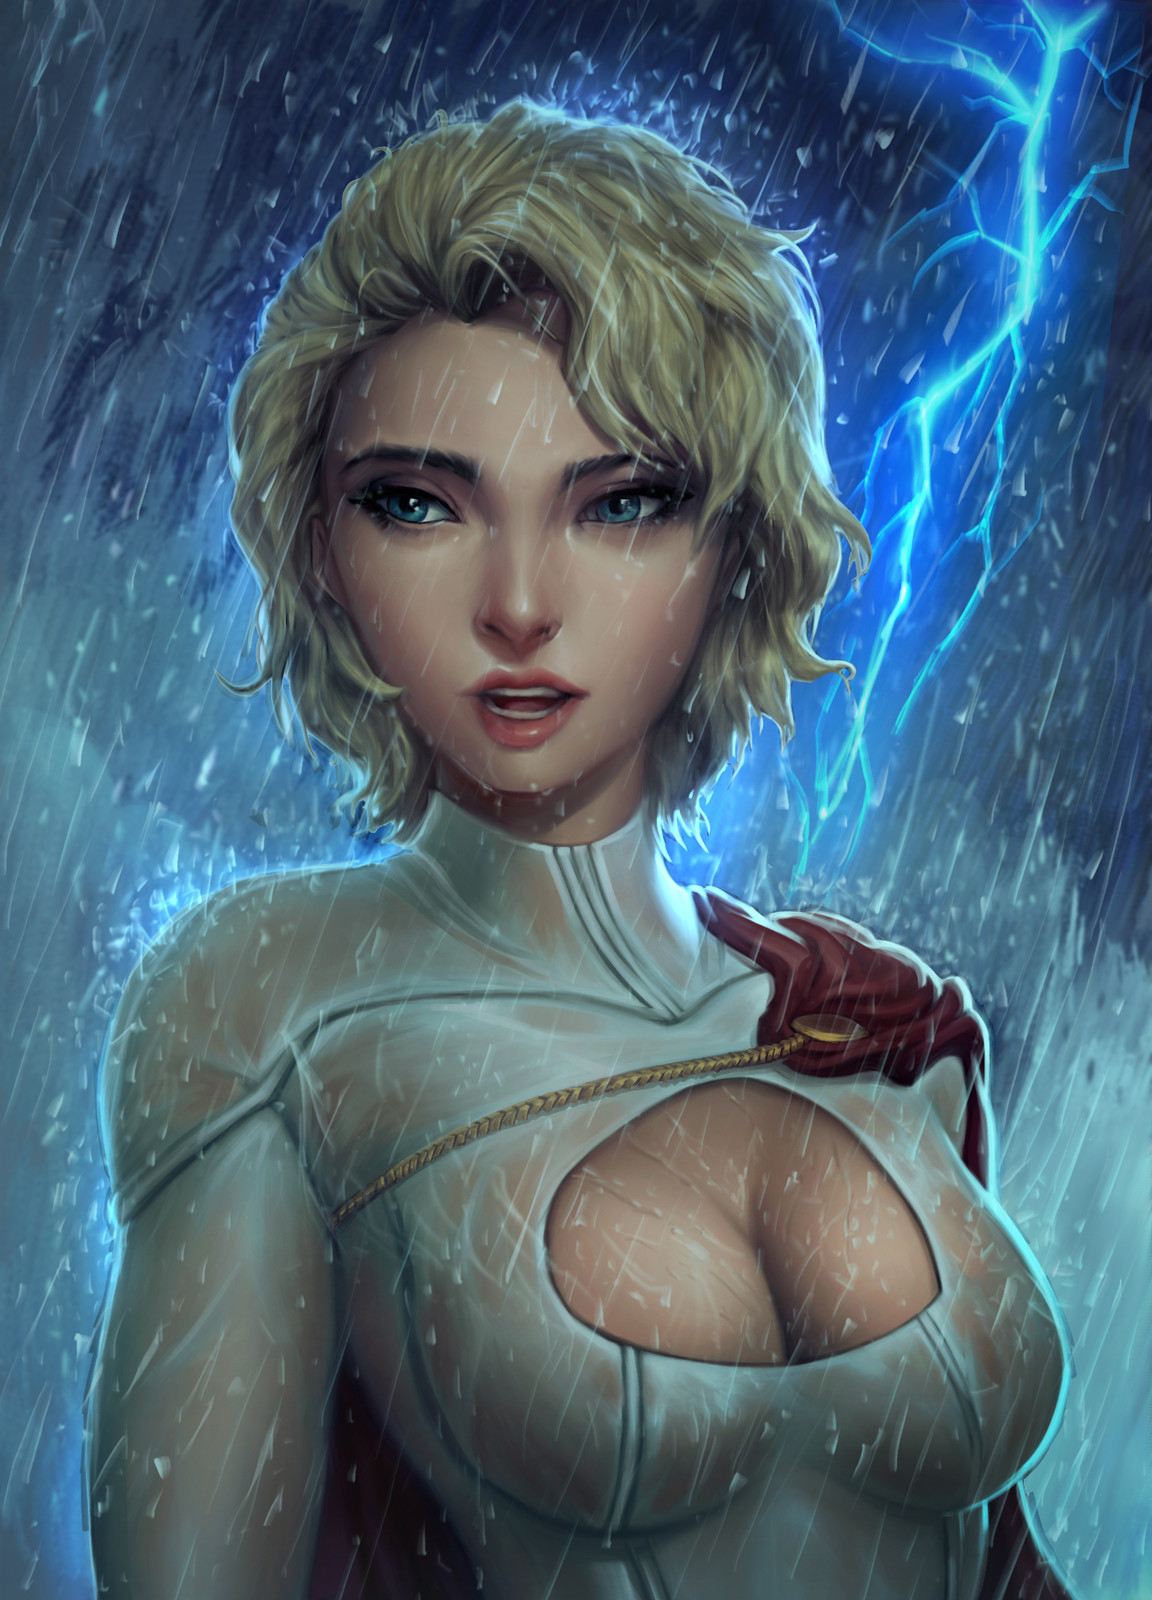 A Fanart for Powergirl.